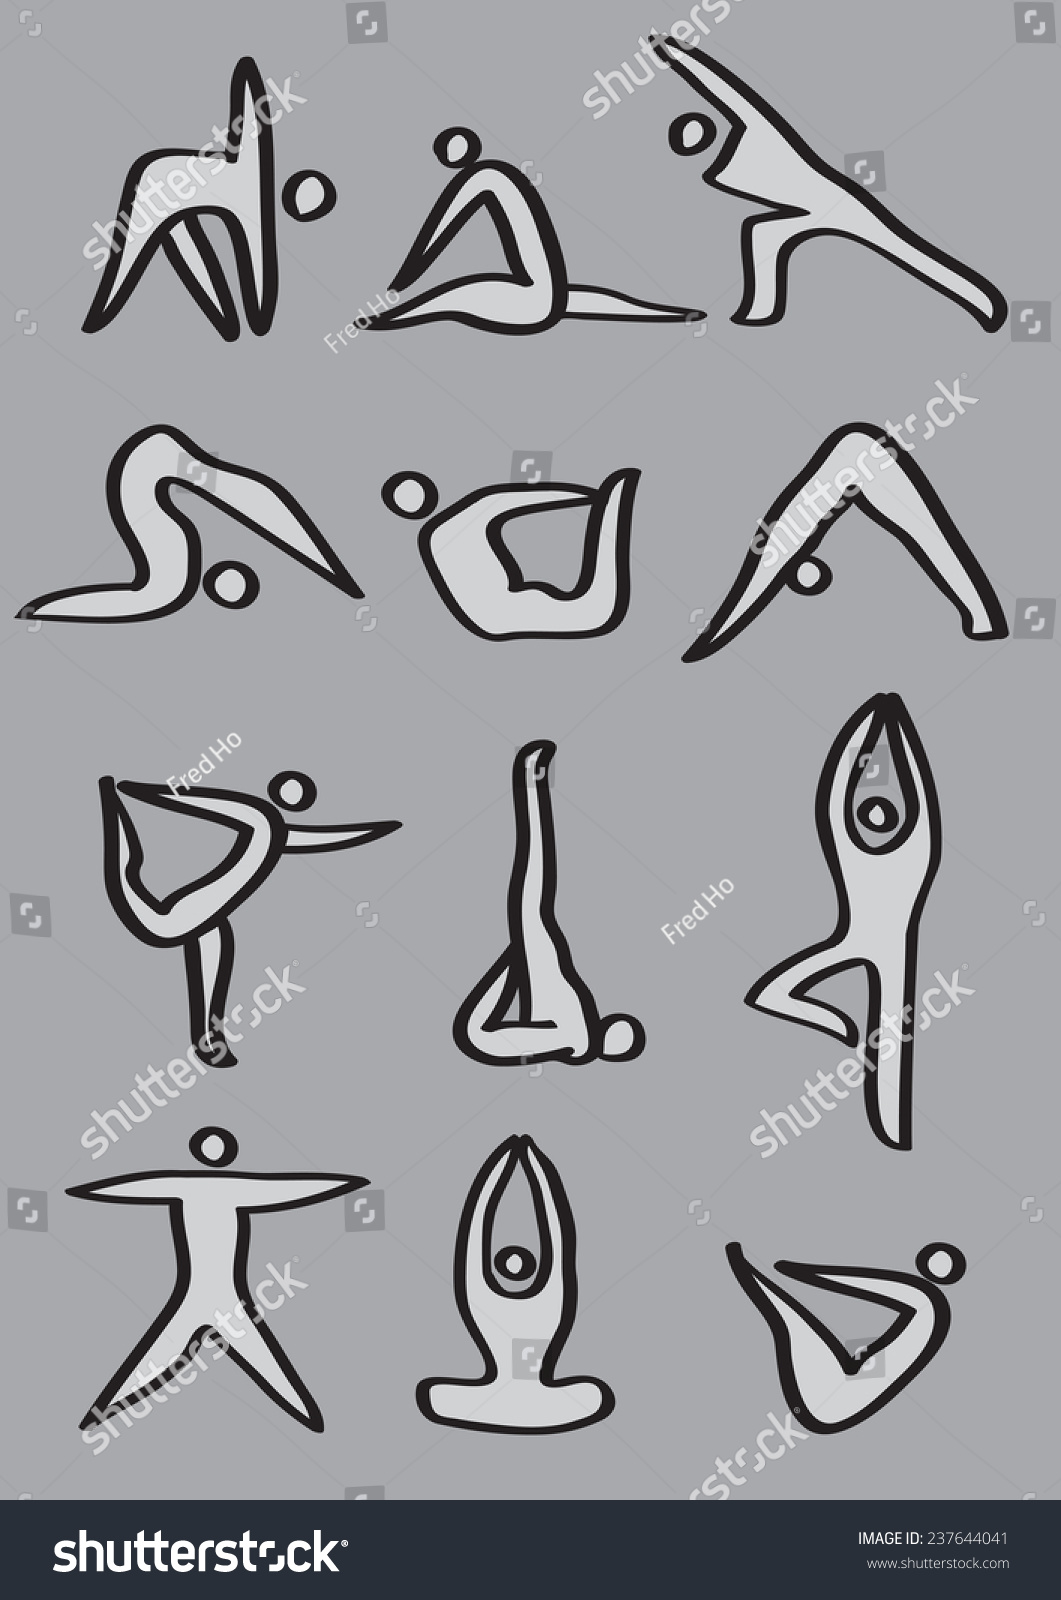 Simple Icon Man Demonstrating Different Yoga Stock Vector ...